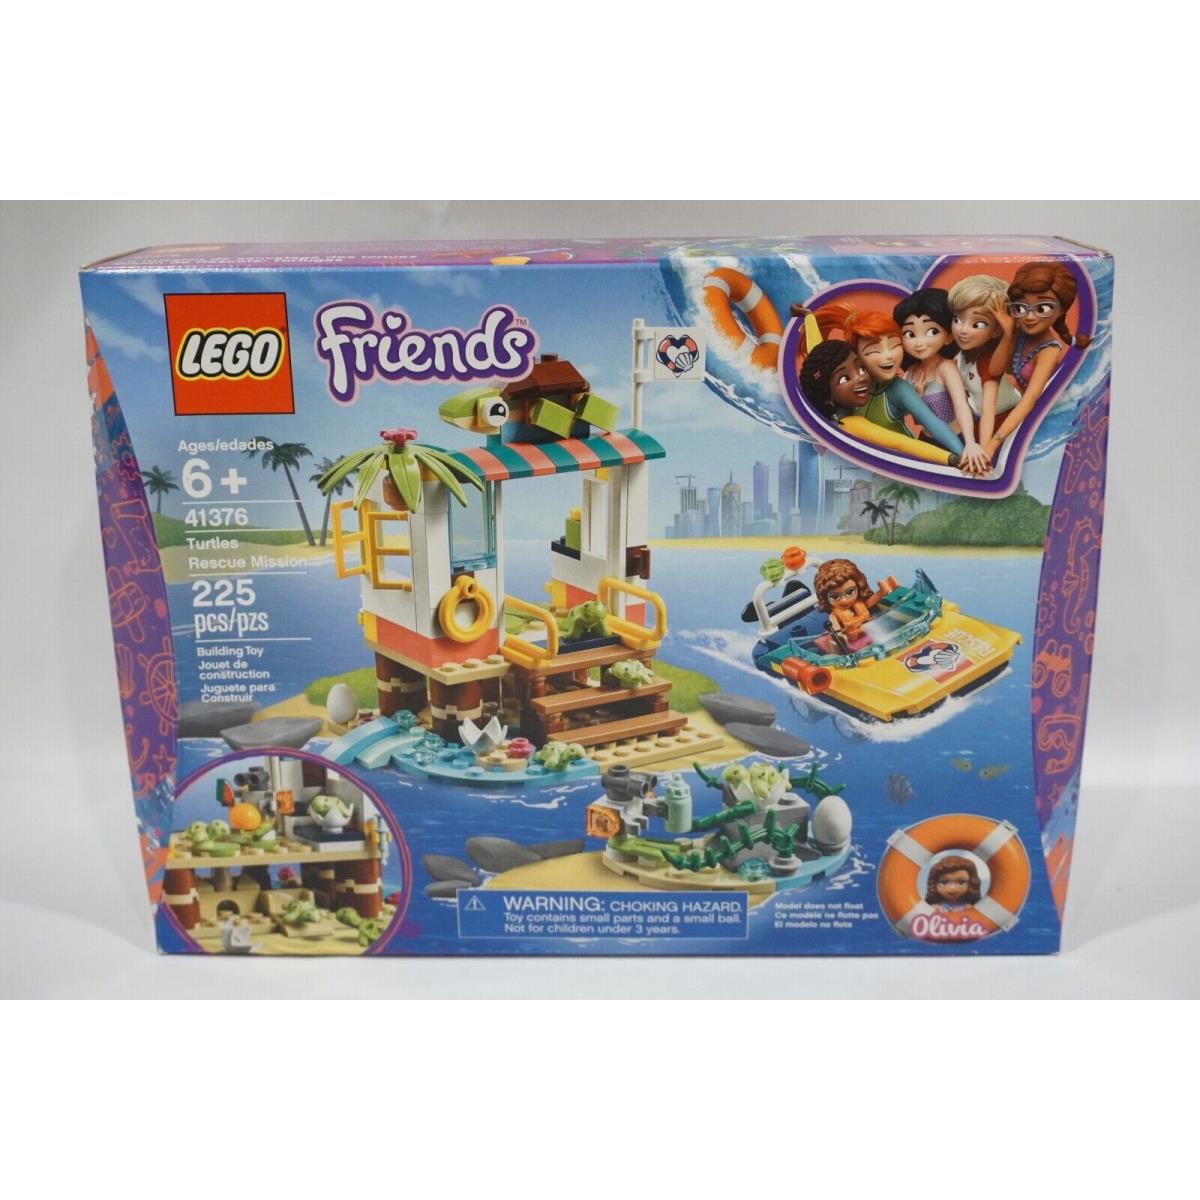 Lego Friends 41376 Turtles Rescue Mission Retired Set